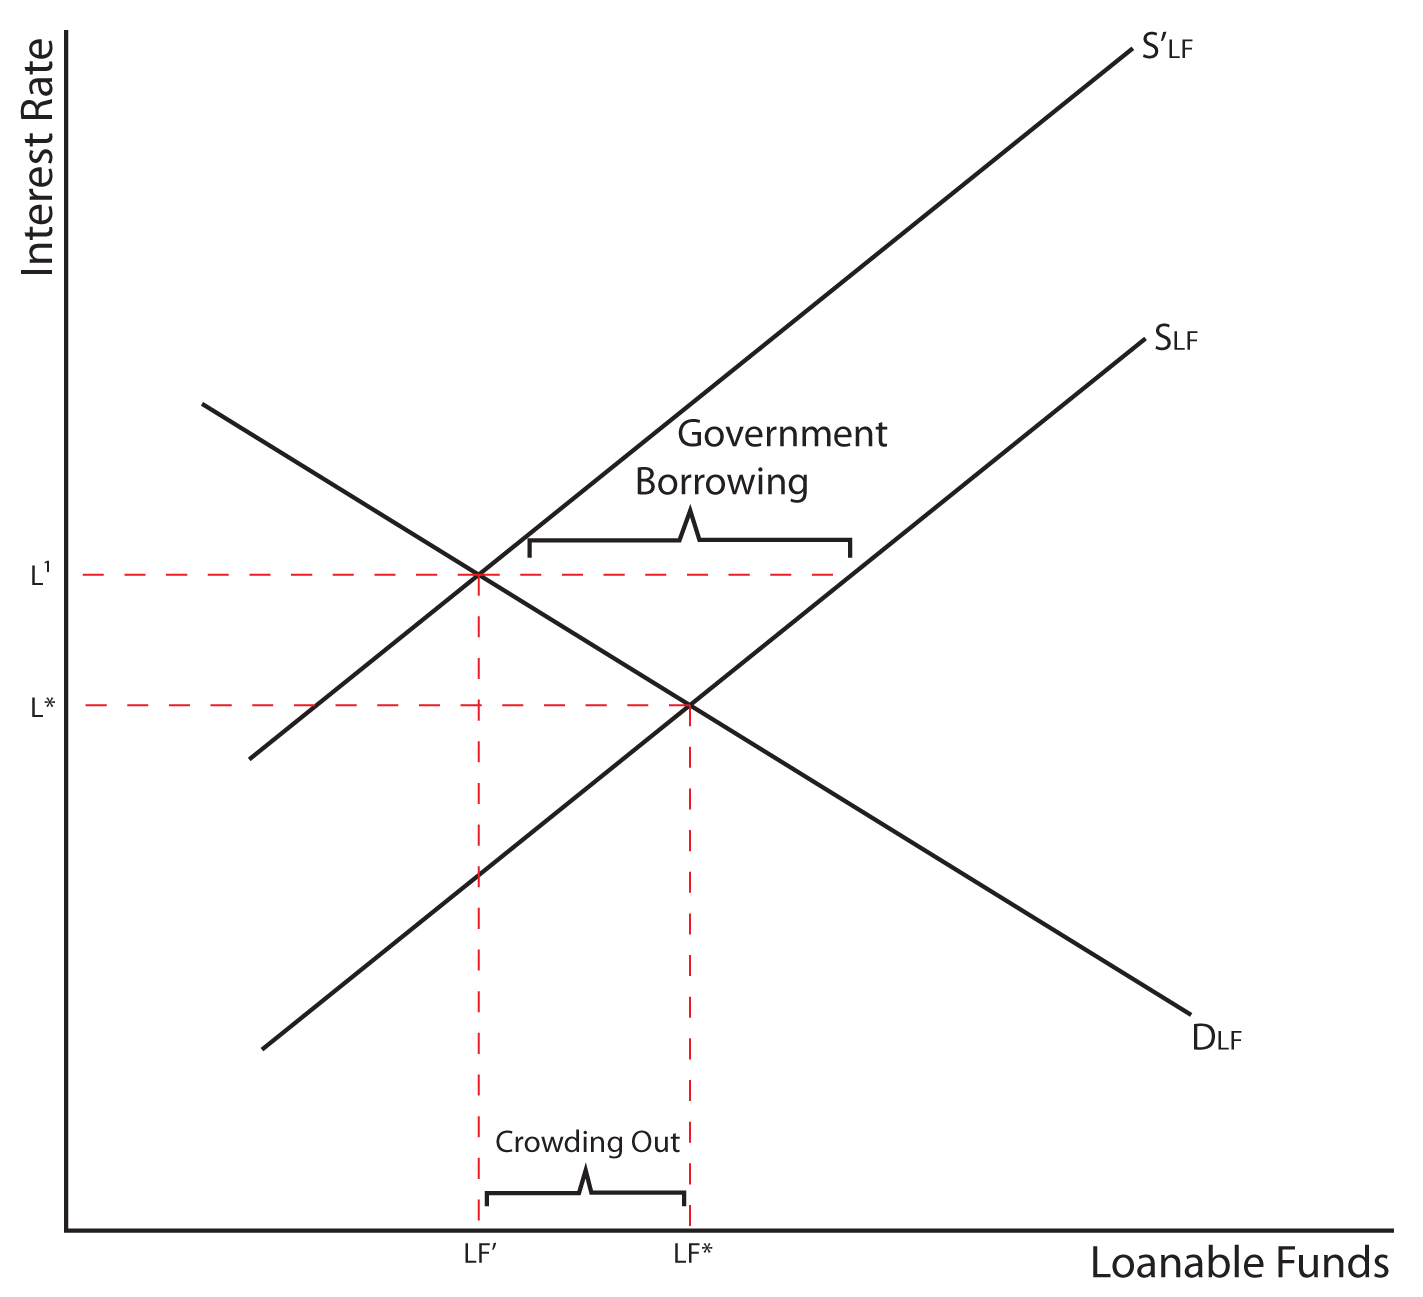 Image 9.03. This image depicts one graph. This graph's X axis is labeled Loanable Funds, and its Y axis is labeled Interest Rate. A line with a decreasing slope starts with high Y values and low X values and then descends as the X values increase. This descending line is labeled DLF. Two parallel lines with increasing slopes start with lower Y values paired with lower X values and then cross line DLF as they extend upward while their X values increase. The first of the parallel lines, which has higher Y values than the second line, is labeled S'LF. The second parallel line, which has lower Y values than the first line, is labeled SLF. A red dotted line descends from the point where line S'LF and line DLF intersect to the X axis at a value labeled LF'. Another red dotted line descends from the point where line SLF and line DLF intersect to the X axis at a value labeled LF*. The space between values LF' and LF* is labeled Crowding Out. A red dotted line extends horizontally from the point where line SLF and line DLF intersect to the Y axis at a value labeled L*. Another red dotted line extends horizontally from the point where line S'LF and line DLF to the Y axis at a value labeled L superscript 1. That same red dotted line also extends horizontally, corresponding with increasing X values, until it touches line SLF (which is moving parallel to line S'LF but at lower Y values). The space between line S'LF and line SLF that the horizontal red dotted line extends between is labeled Government Borrowing.